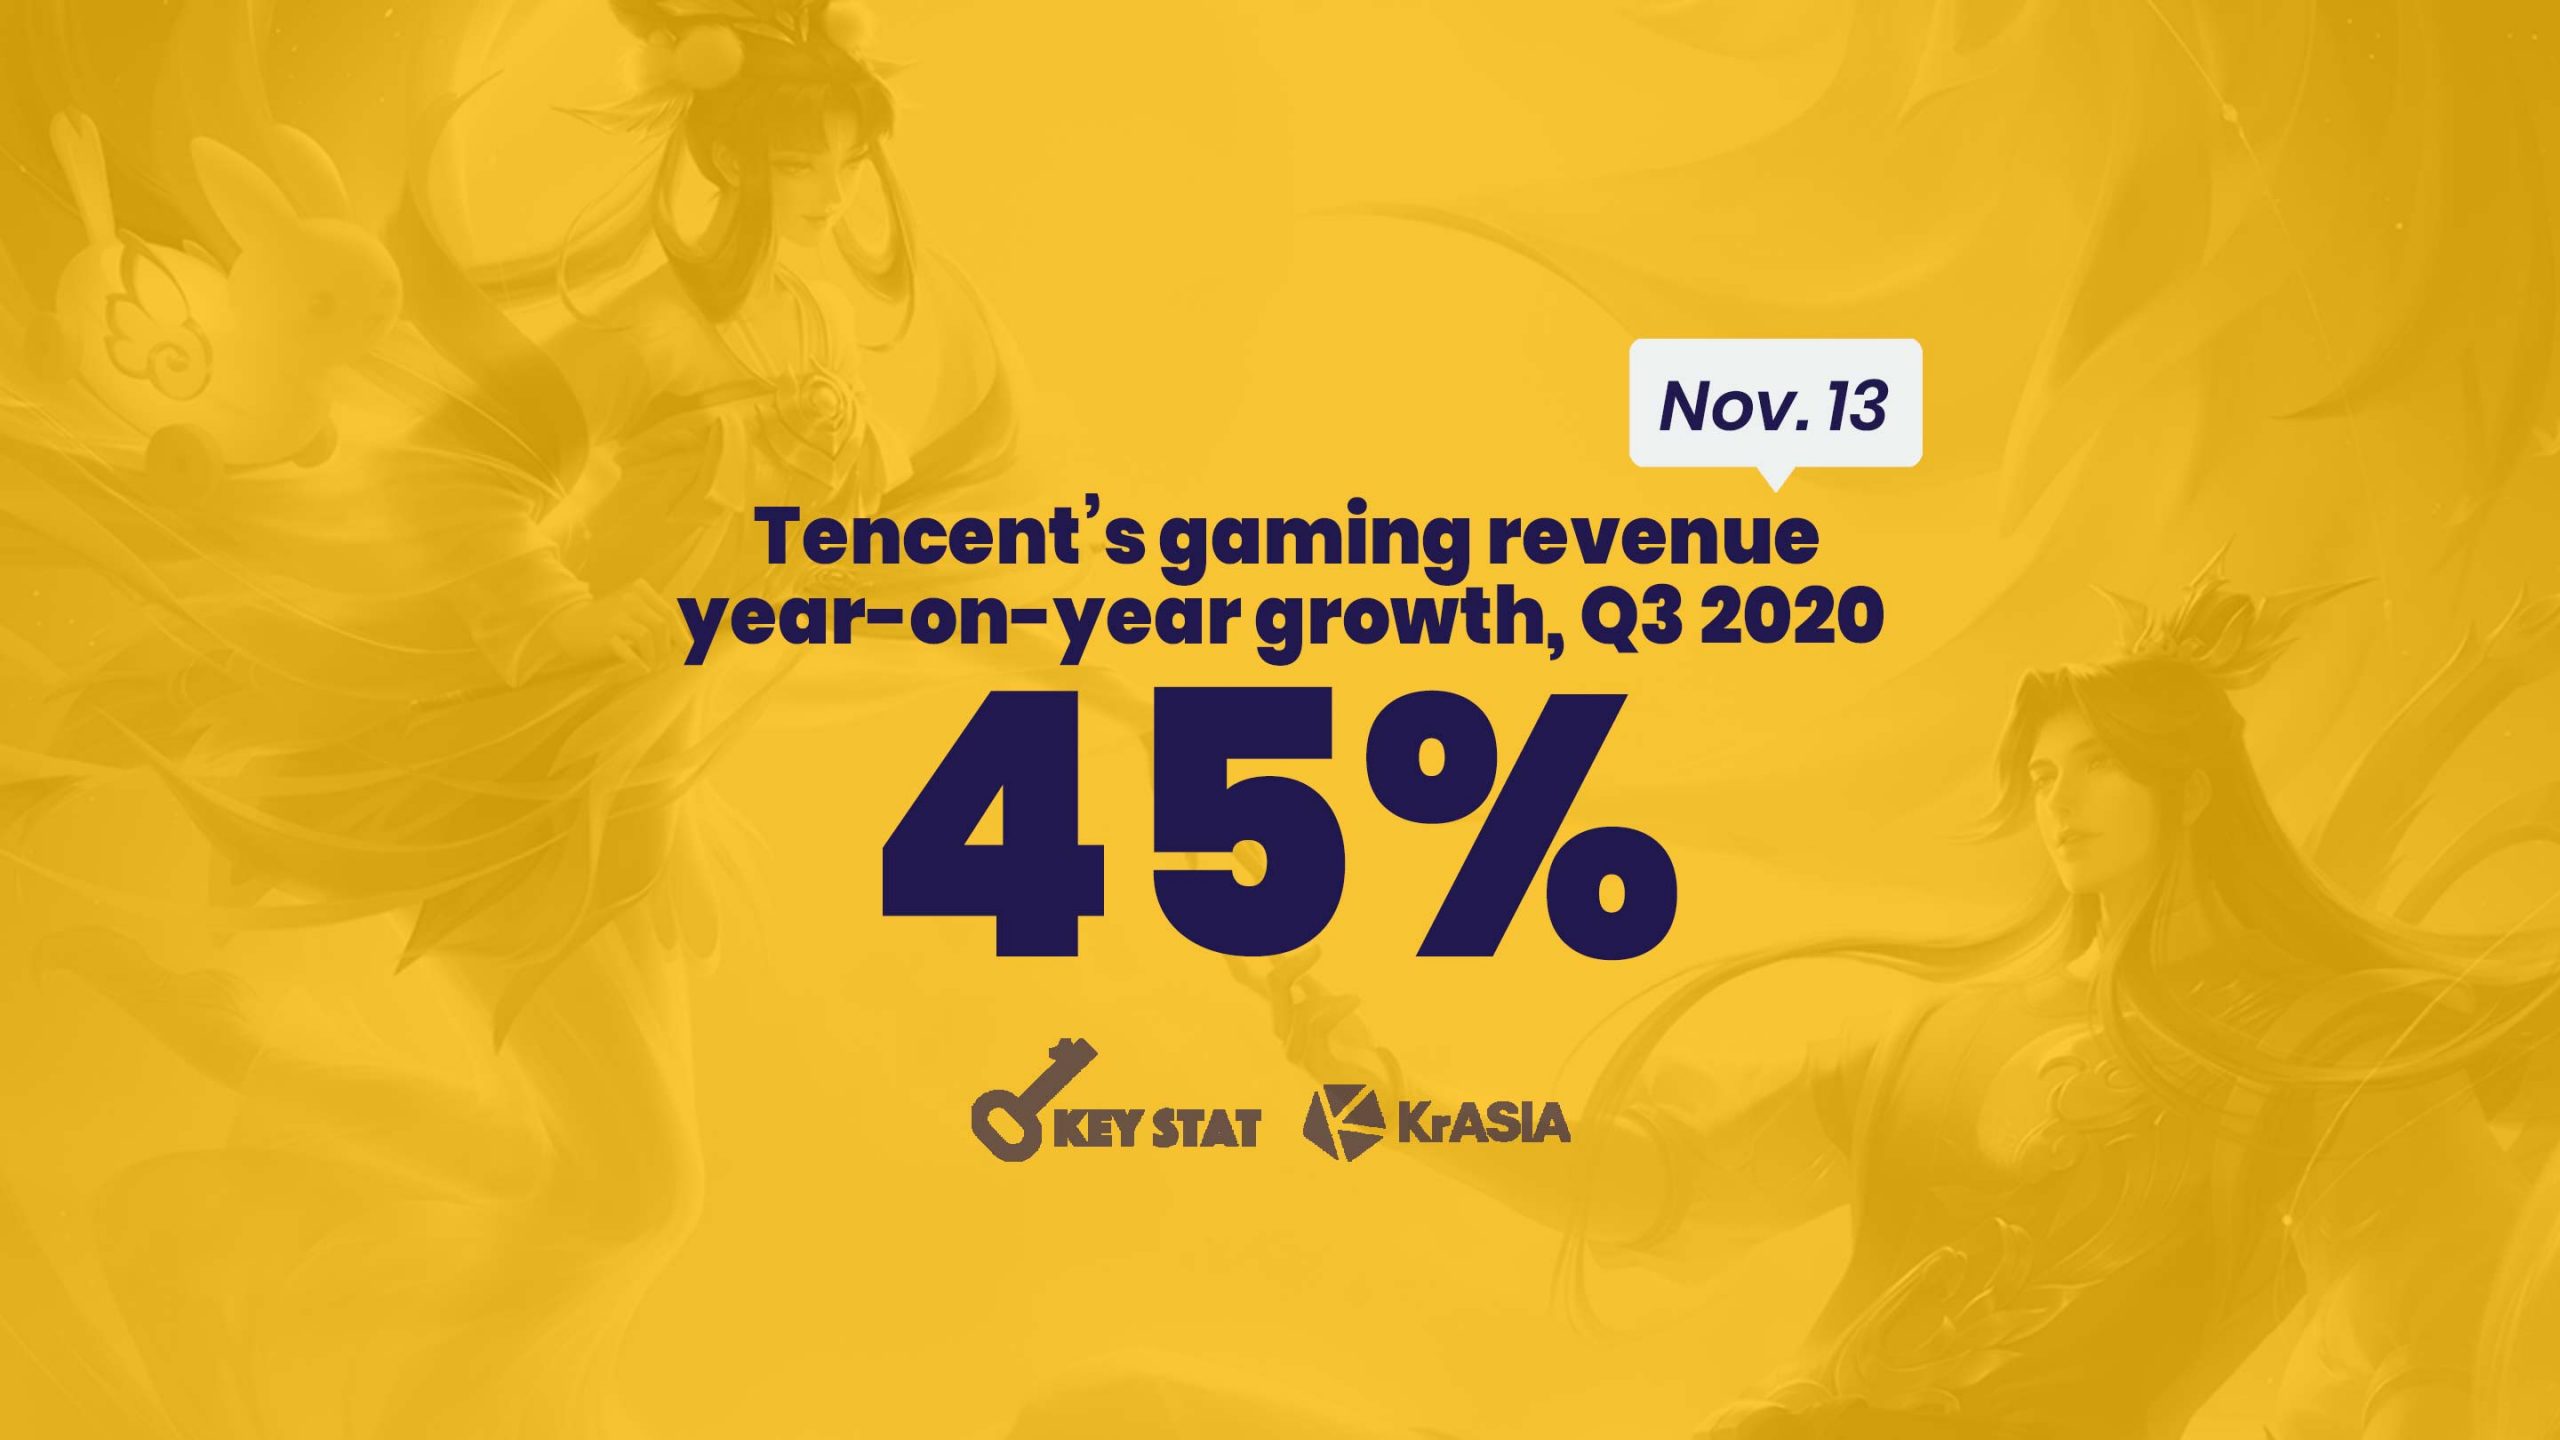 KEY STAT | Tencent’s gaming revenue grows as fast as during its peak in 2017